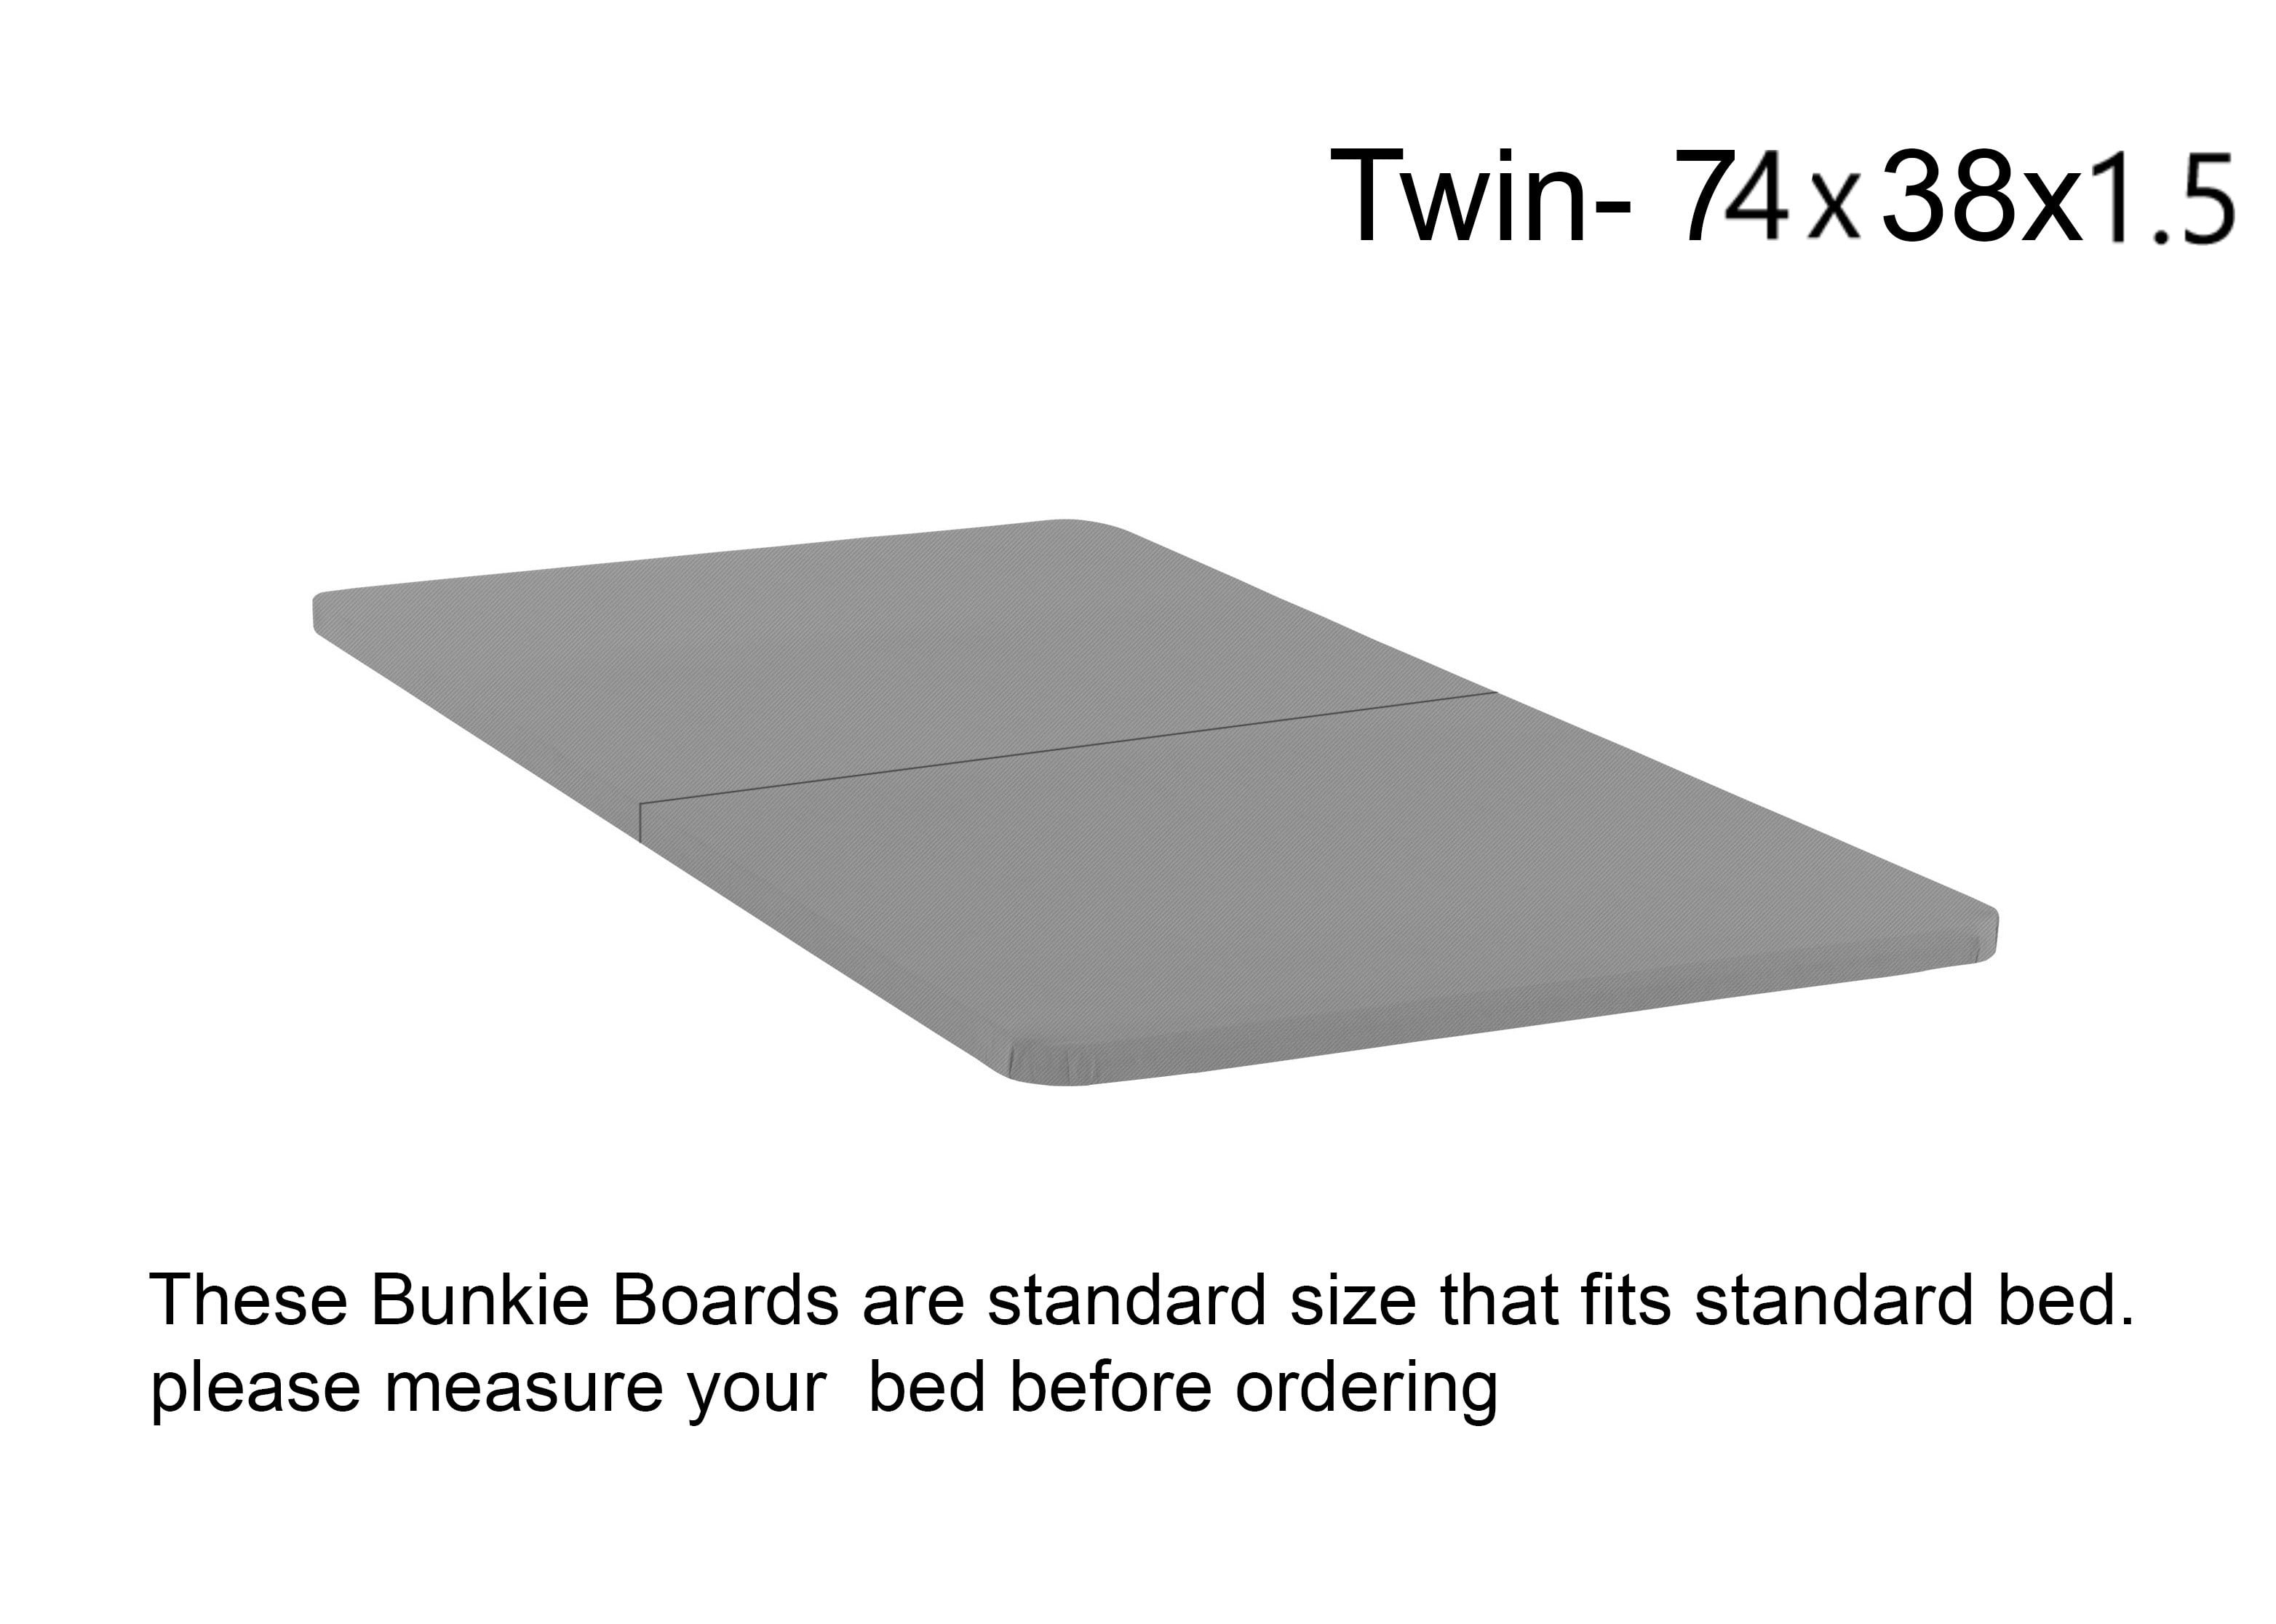 Bunkie Board Split Support Size 1.5" Twin Super Strong Spine Position Blood Flow 